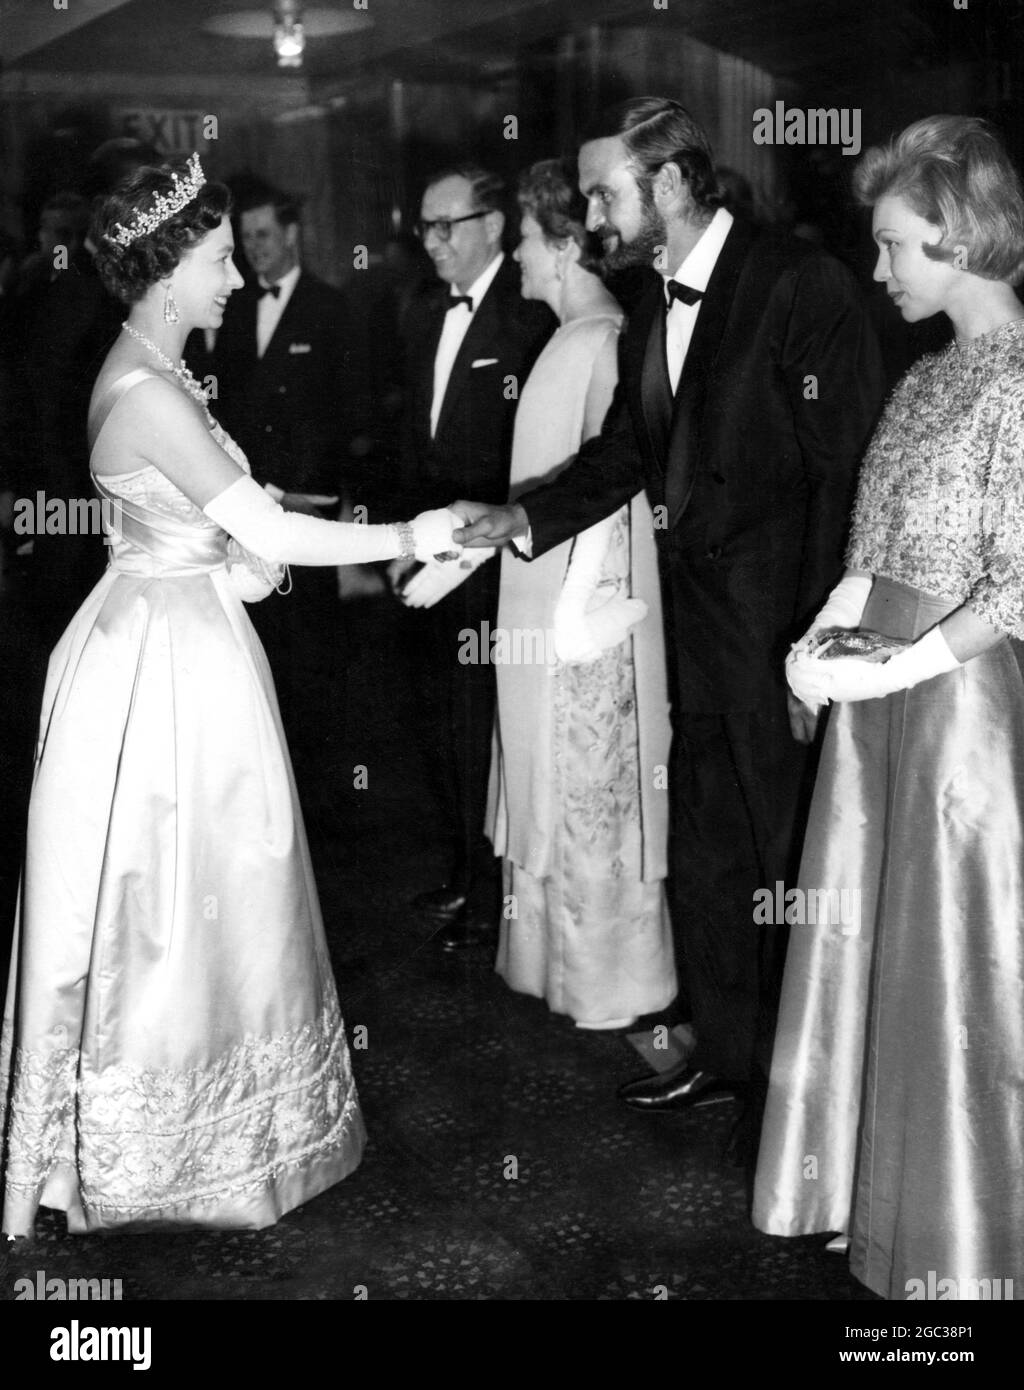 Her Majesty The Queen Elizabeth II at film premiere shakes hands with Stanley Baker one of the stars in the the film The Guns of Navarone on the right is Mrs Stanley Baker 27 April 1961 Stock Photo